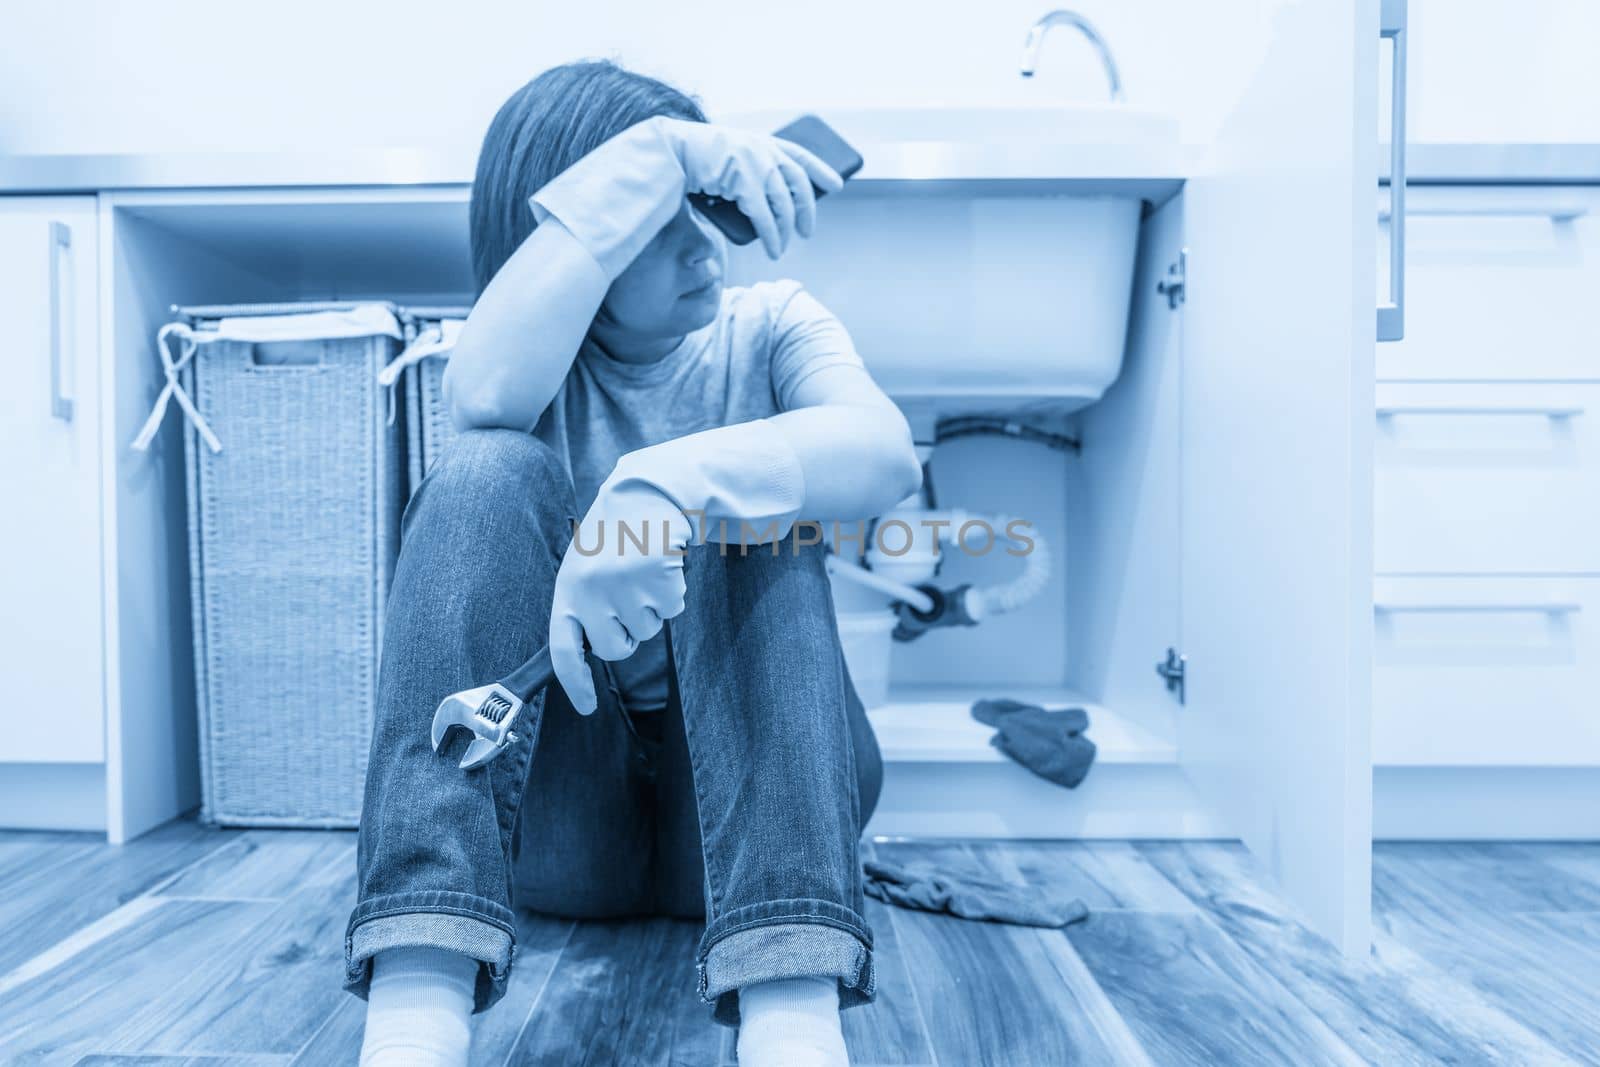 Woman sitting near leaking sink in laundry room holding adjustable wrench by Mariakray